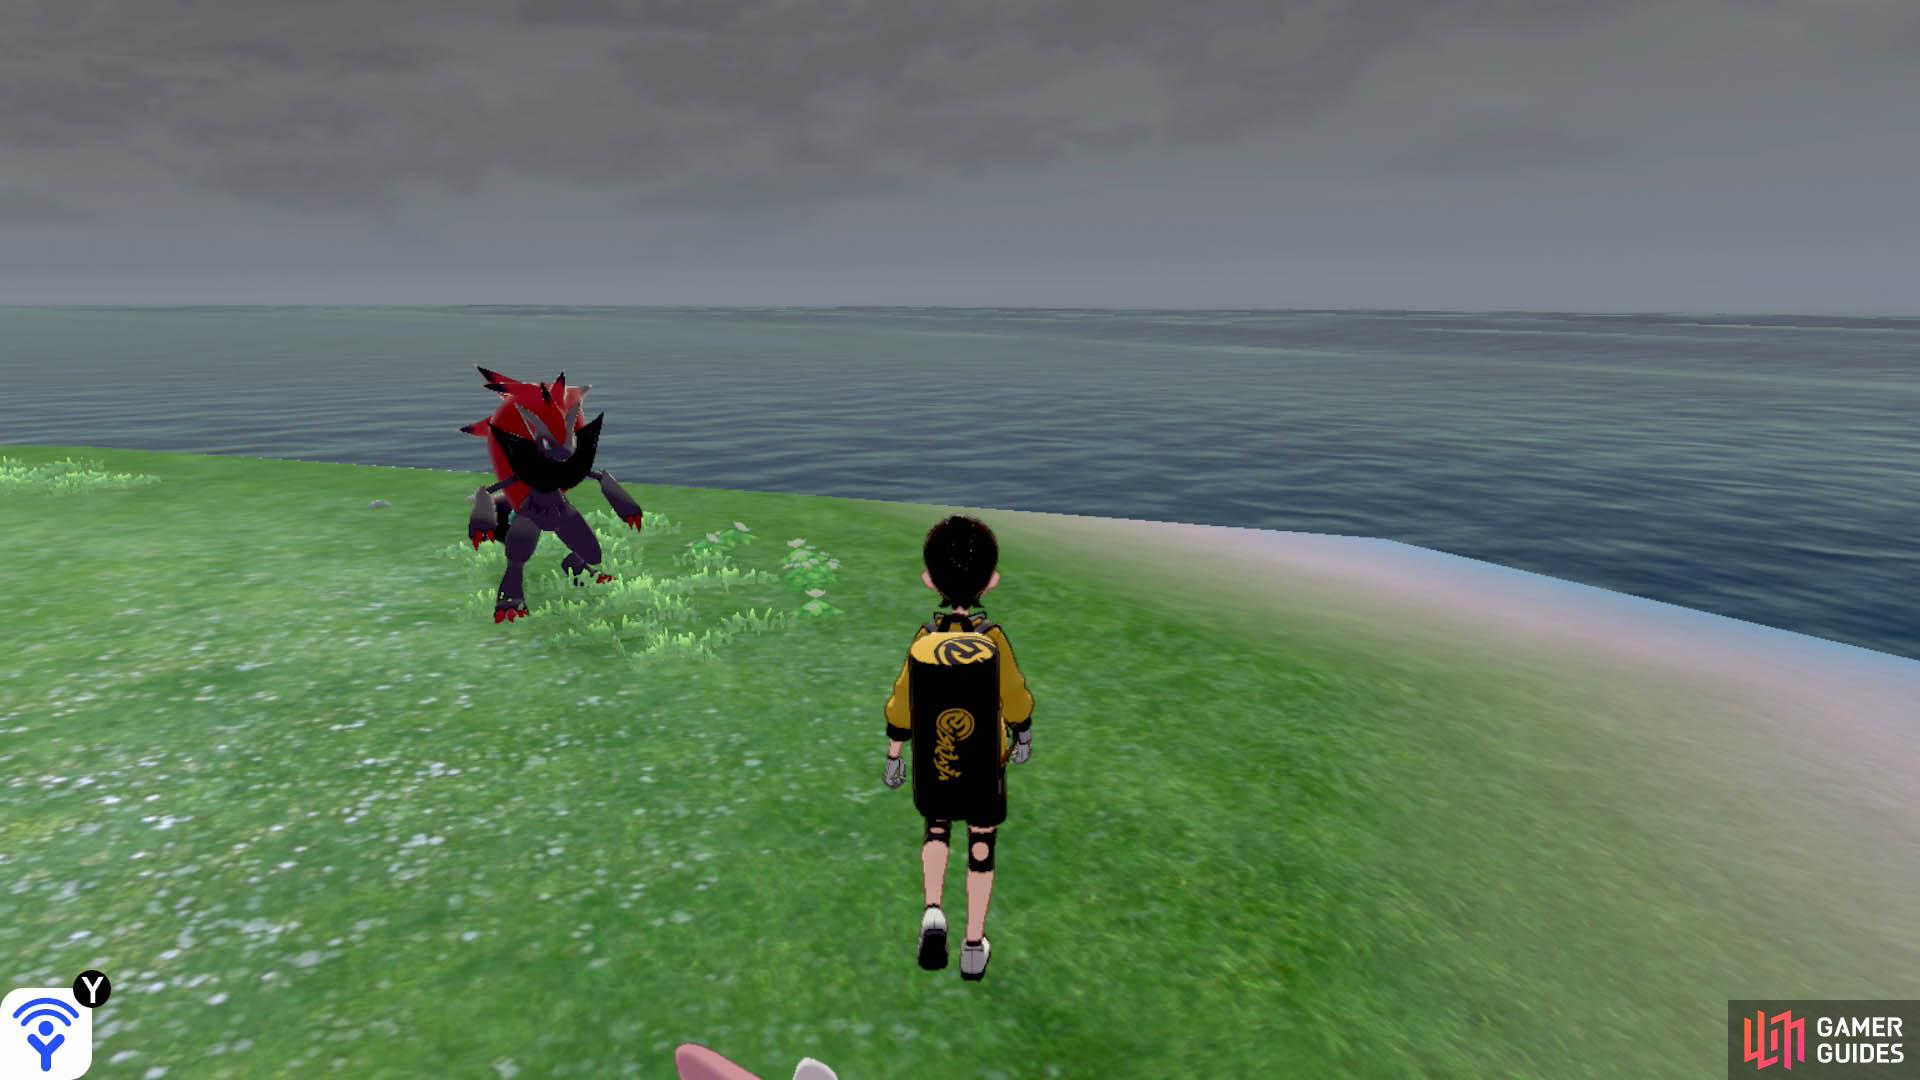 When the weather's cloudy, you can find Zoroark roaming around.